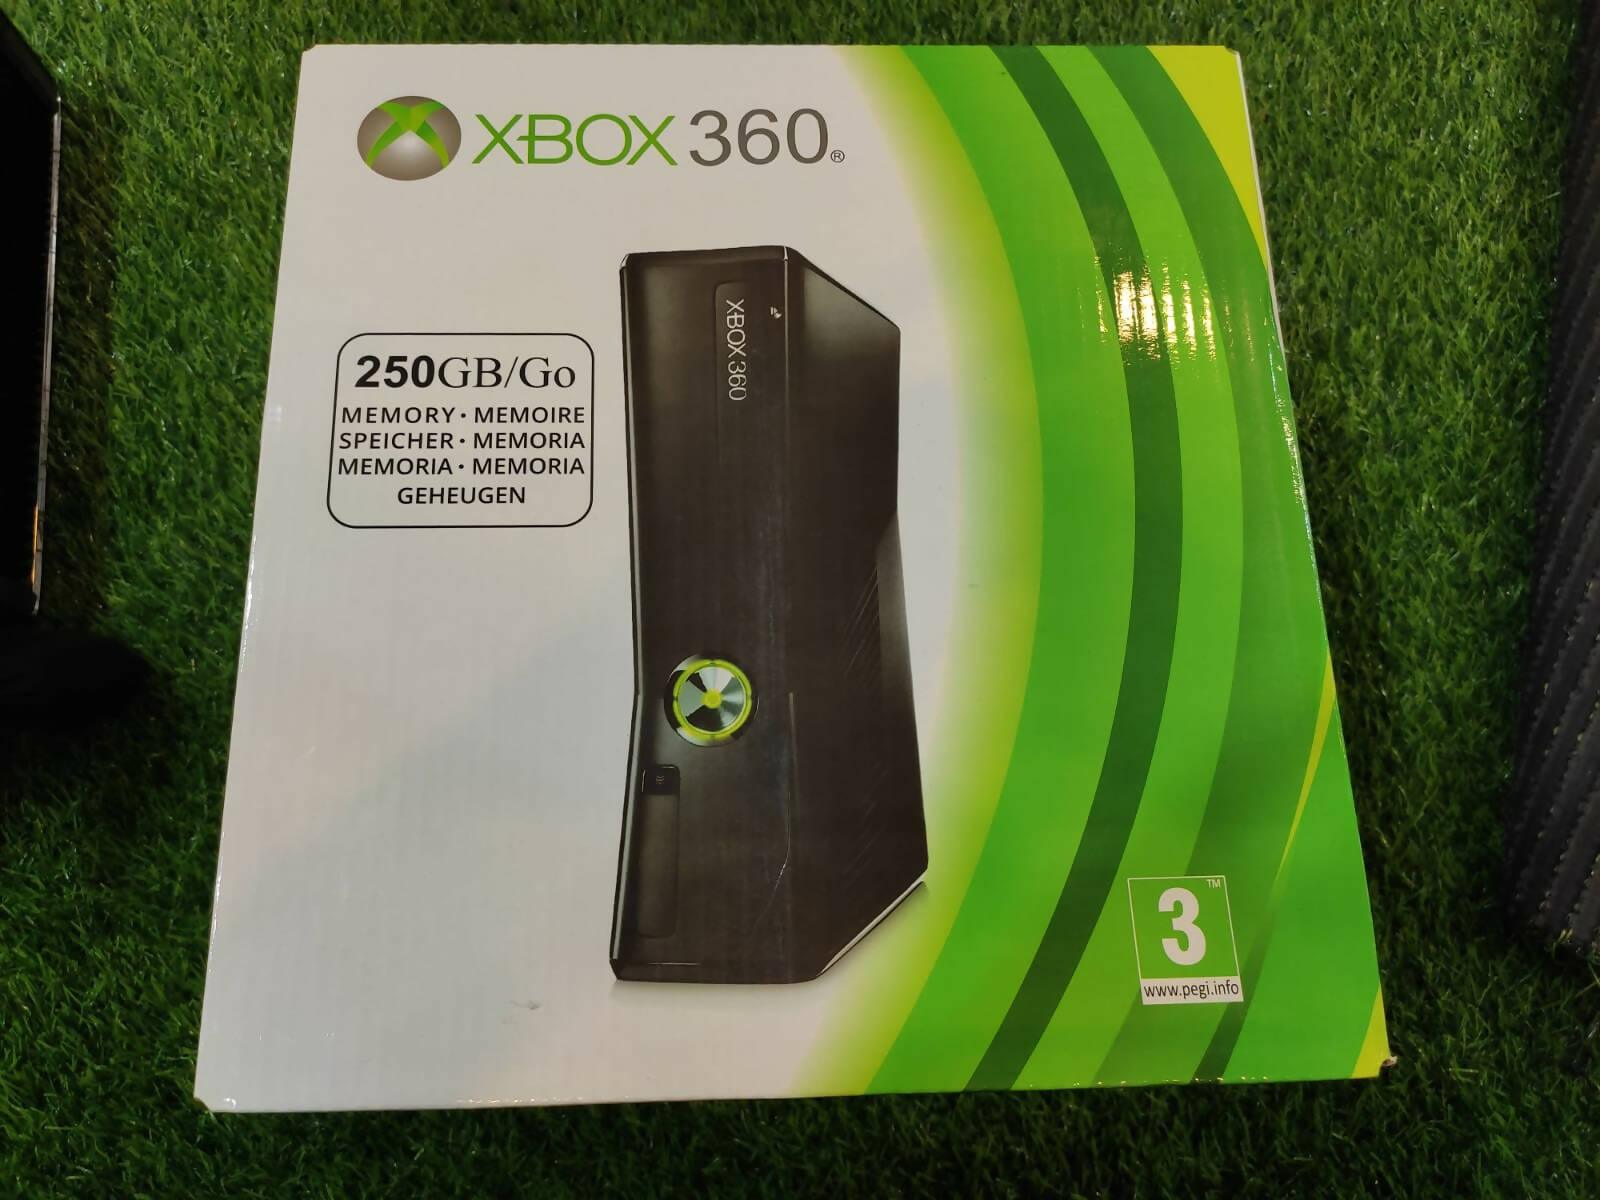 Xbox 360 Console Slim Model 1000gb Jtag 170 Games included 2 Wireless Controllers - ValueBox